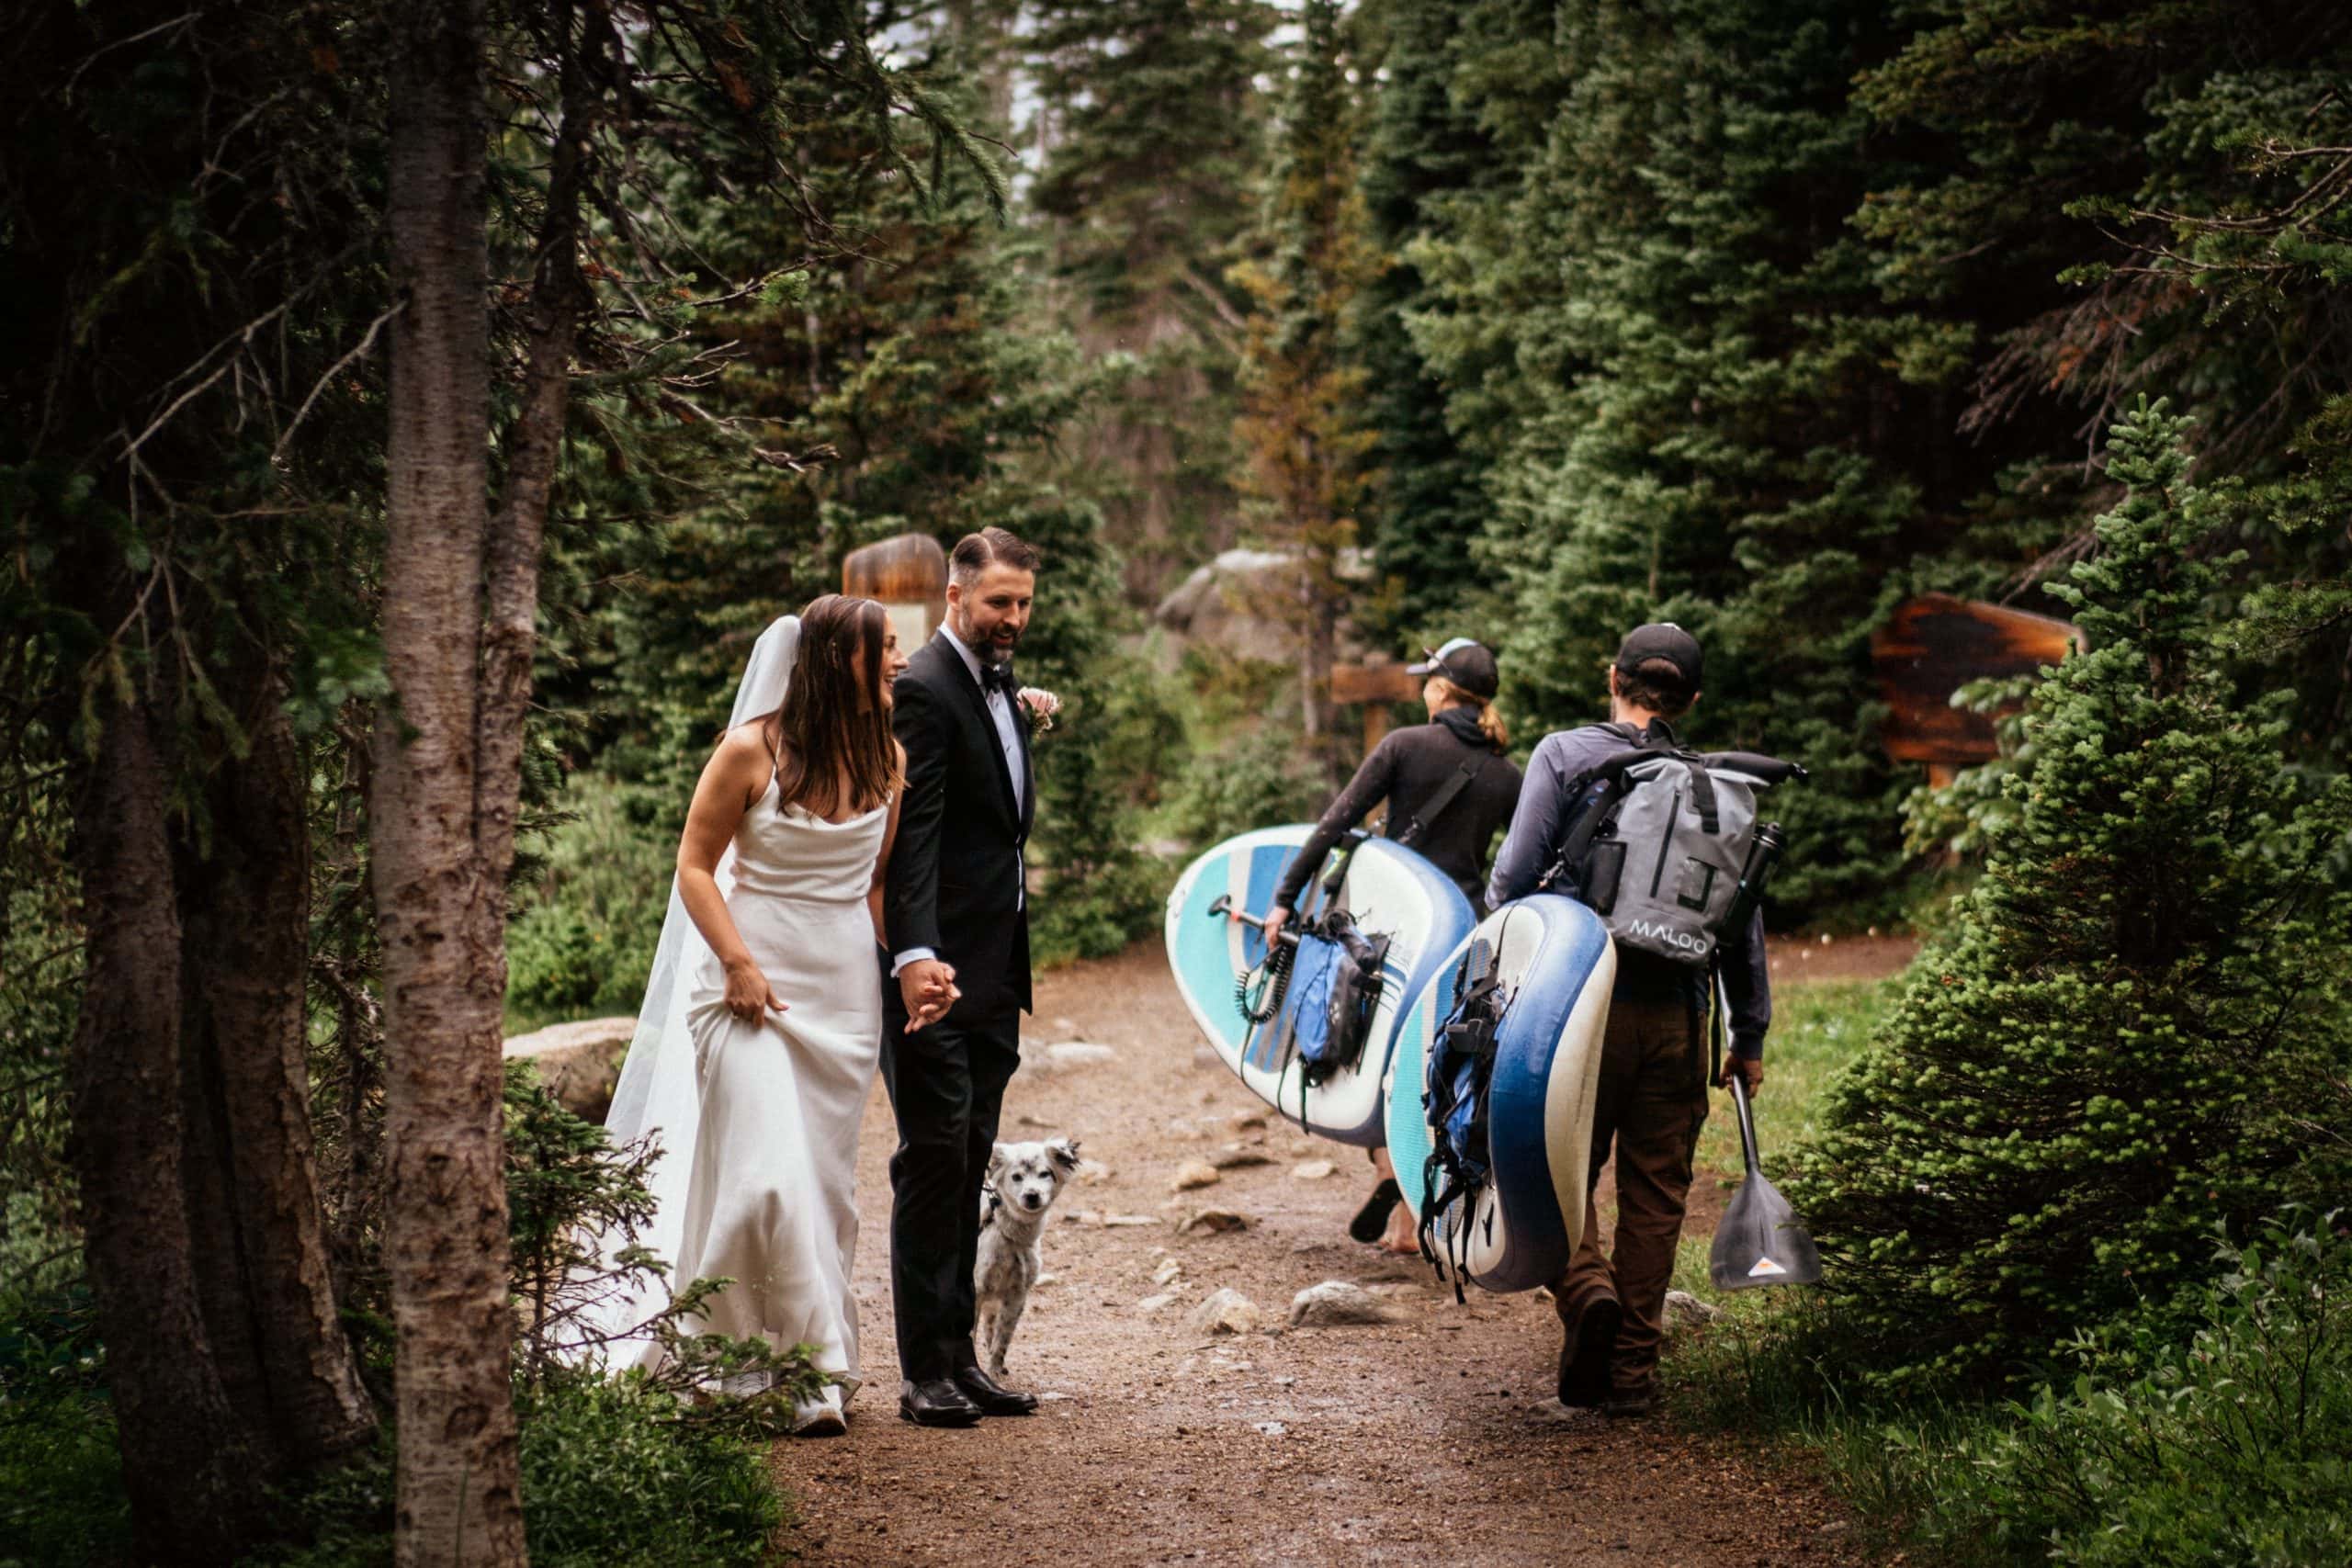 Couple in wedding clothes walking by people carrying paddleboards